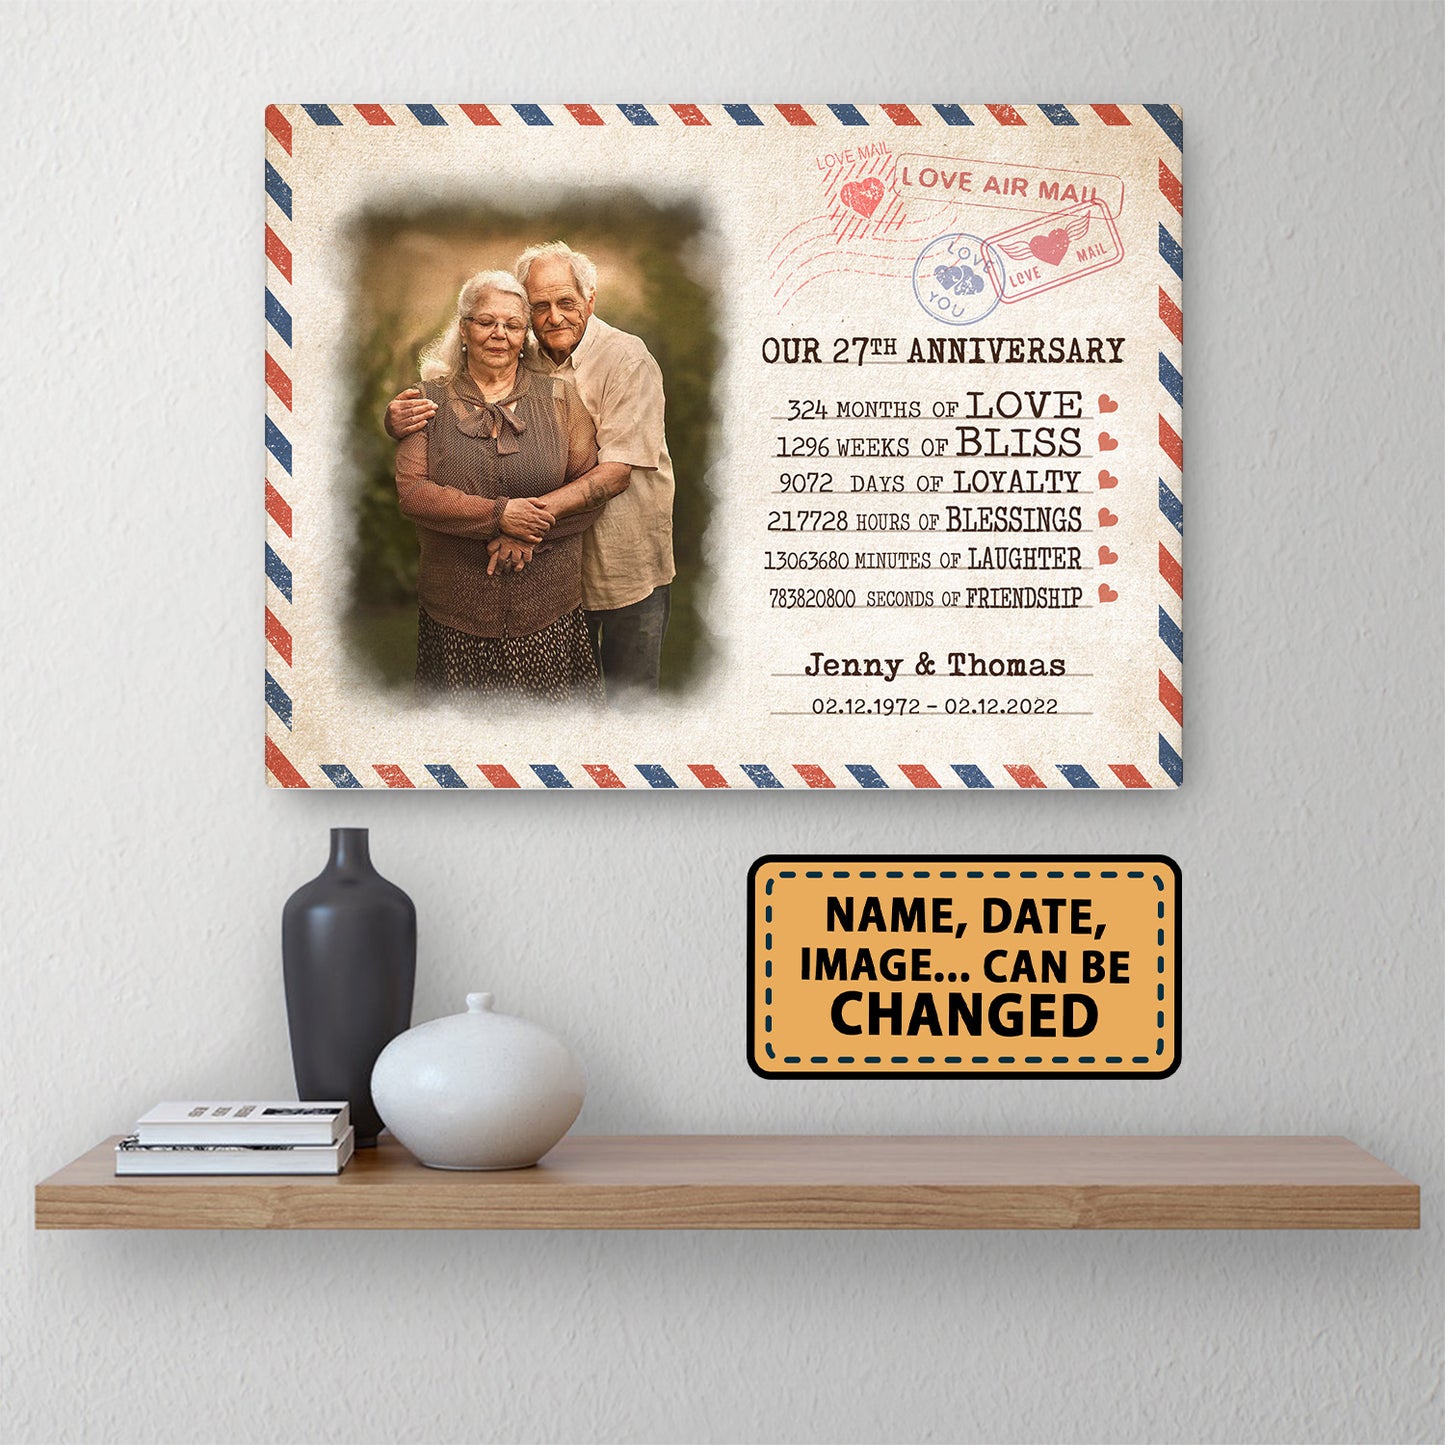 Our 27th Anniversary Letter Valentine Gift Personalized Canvas